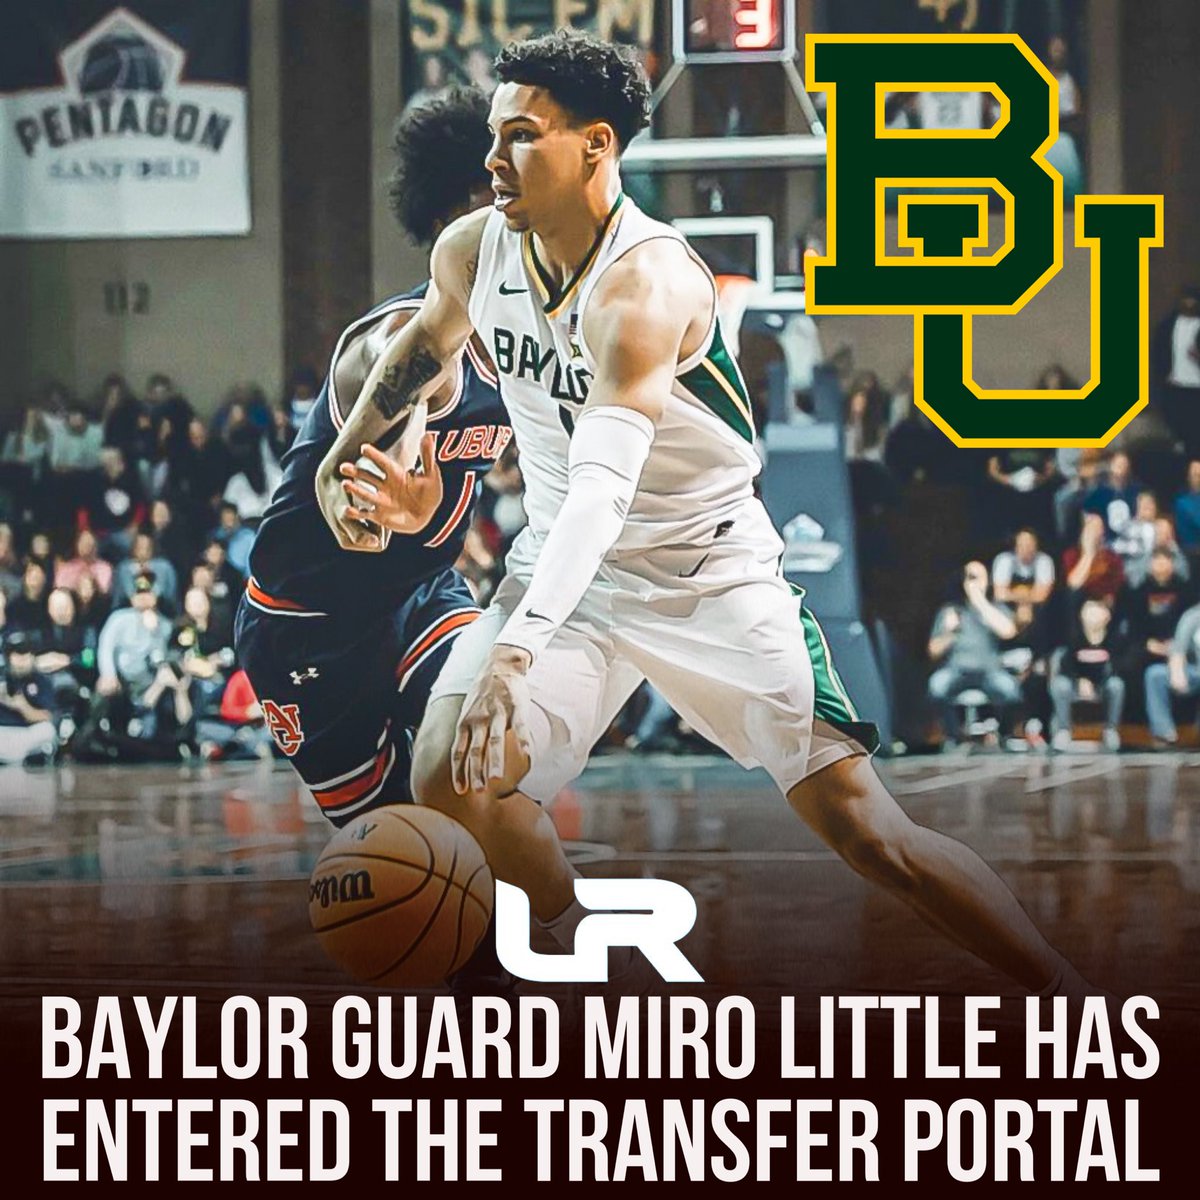 NEWS: Baylor guard Miro Little has entered the transfer portal, a source told @LeagueRDY. Little is a former 4⭐️ recruit who played one season at Baylor. He’s a native of Tampere, Finland. He averaged 1.7PPG and 1.2RPG this season.